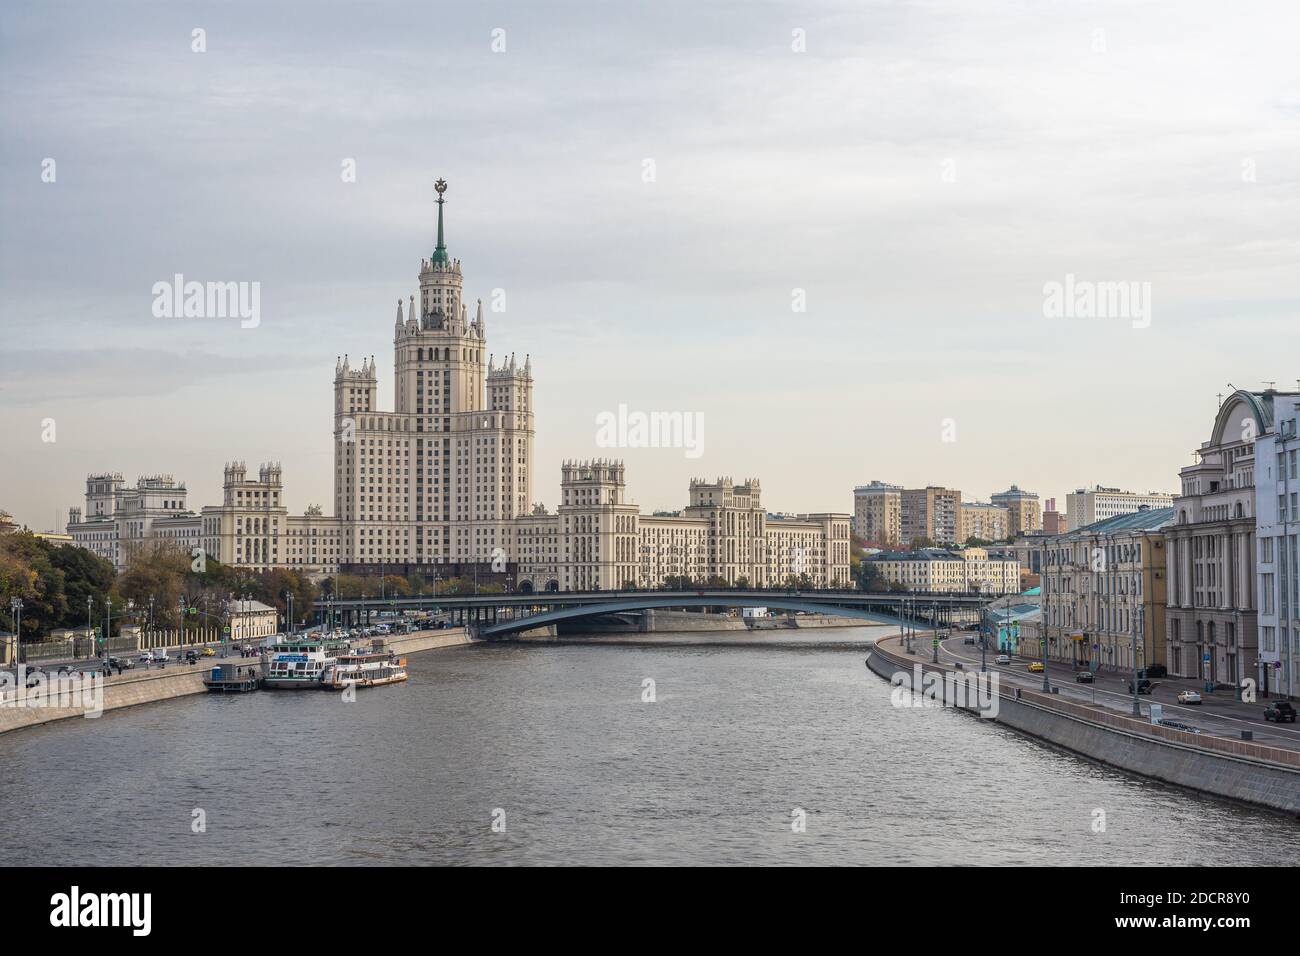 MOSCOW, RUSSIA - NOVEMBER 18, 2020: View from the new floating bridge of park Zaryadye on the frozen Moskva River Moscow River and Stalinist high-rise Stock Photo